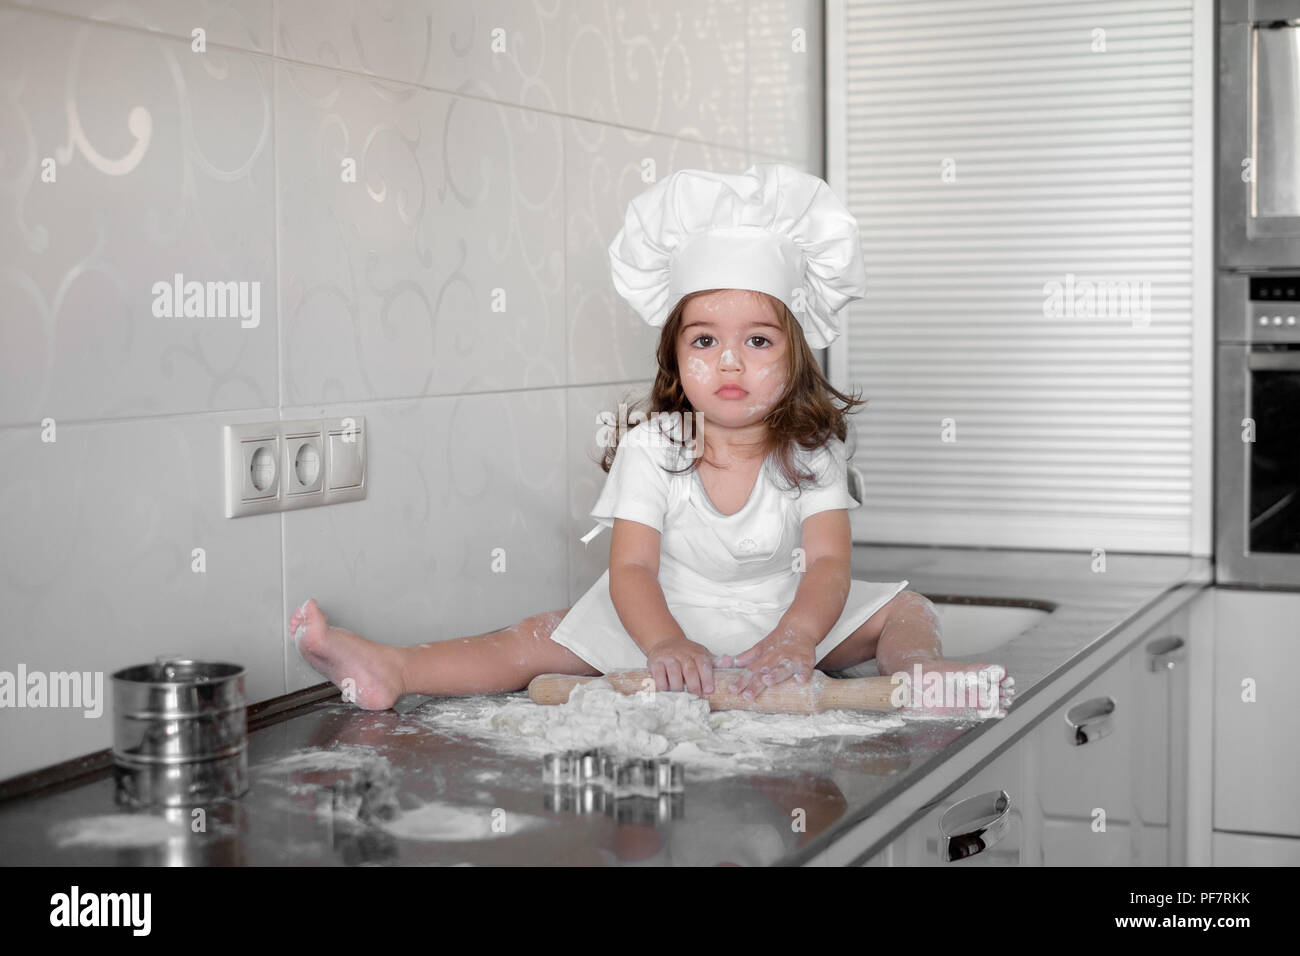 Little girl making dough and cookies in kitchen Stock Photo